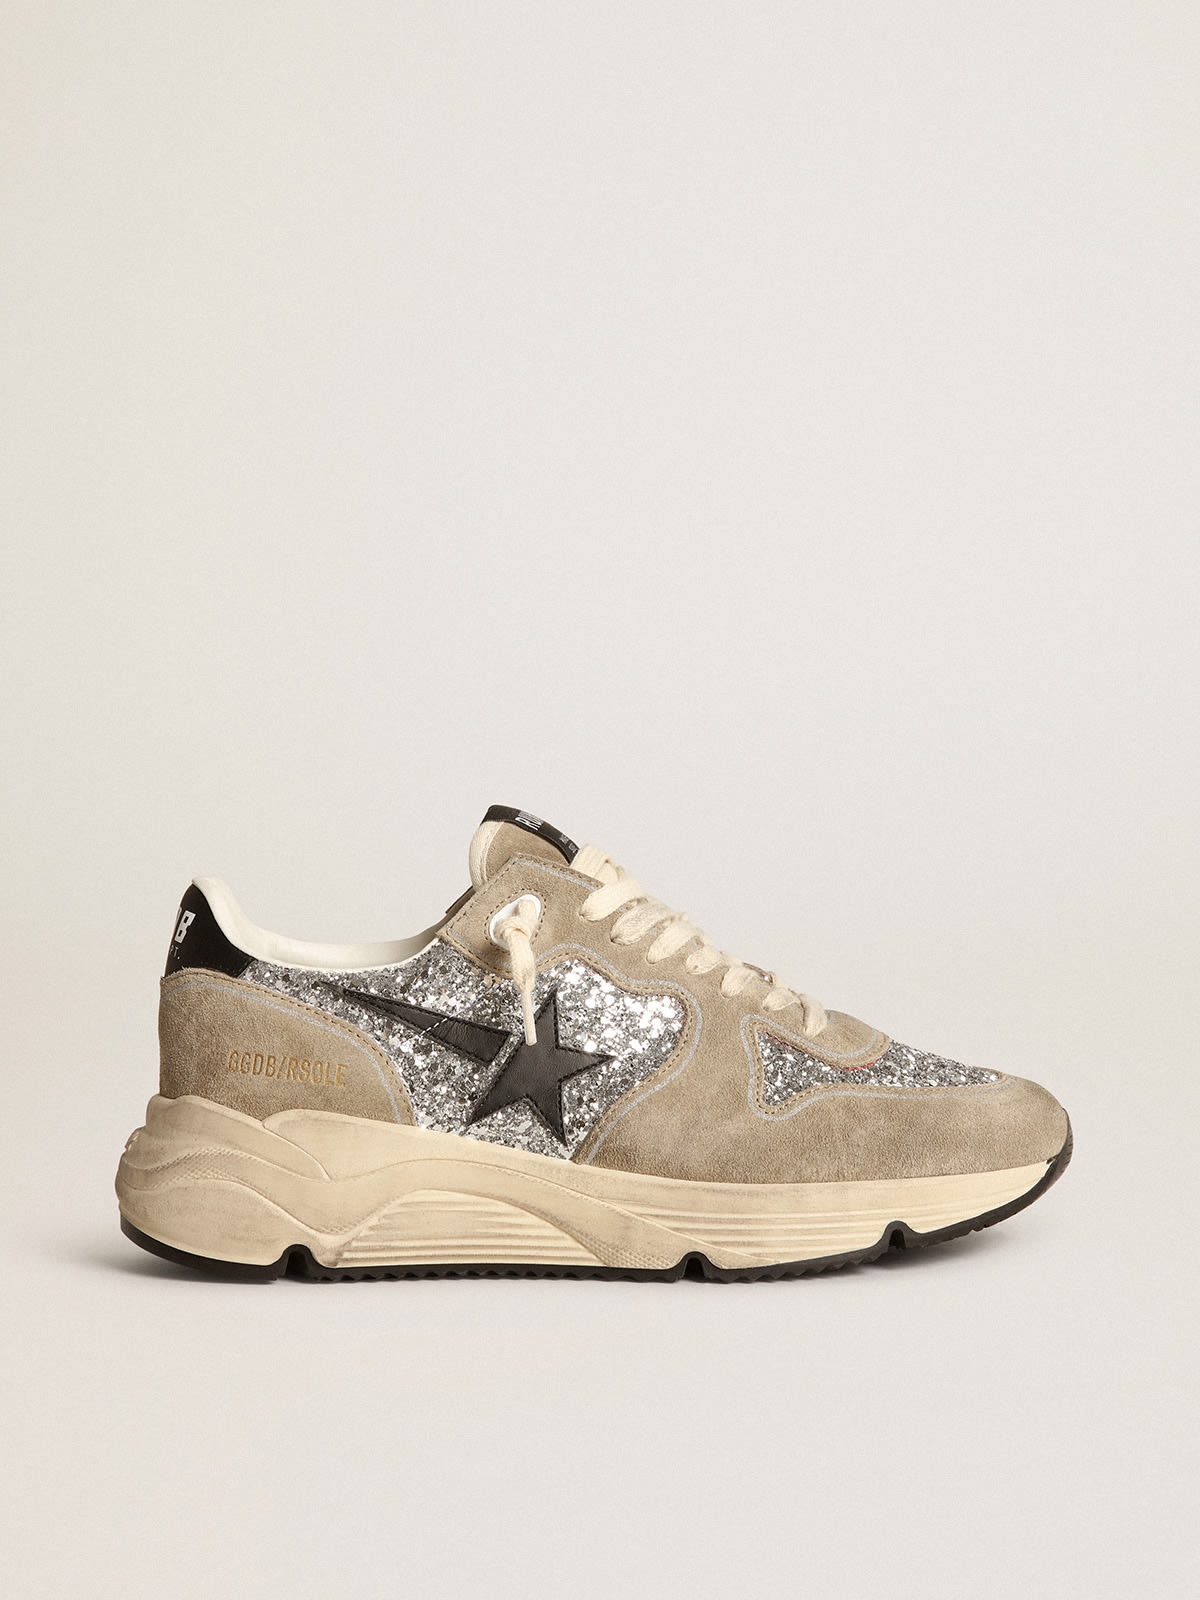 Running Sole sneakers in silver glitter and dove-gray suede with black leather star - 1